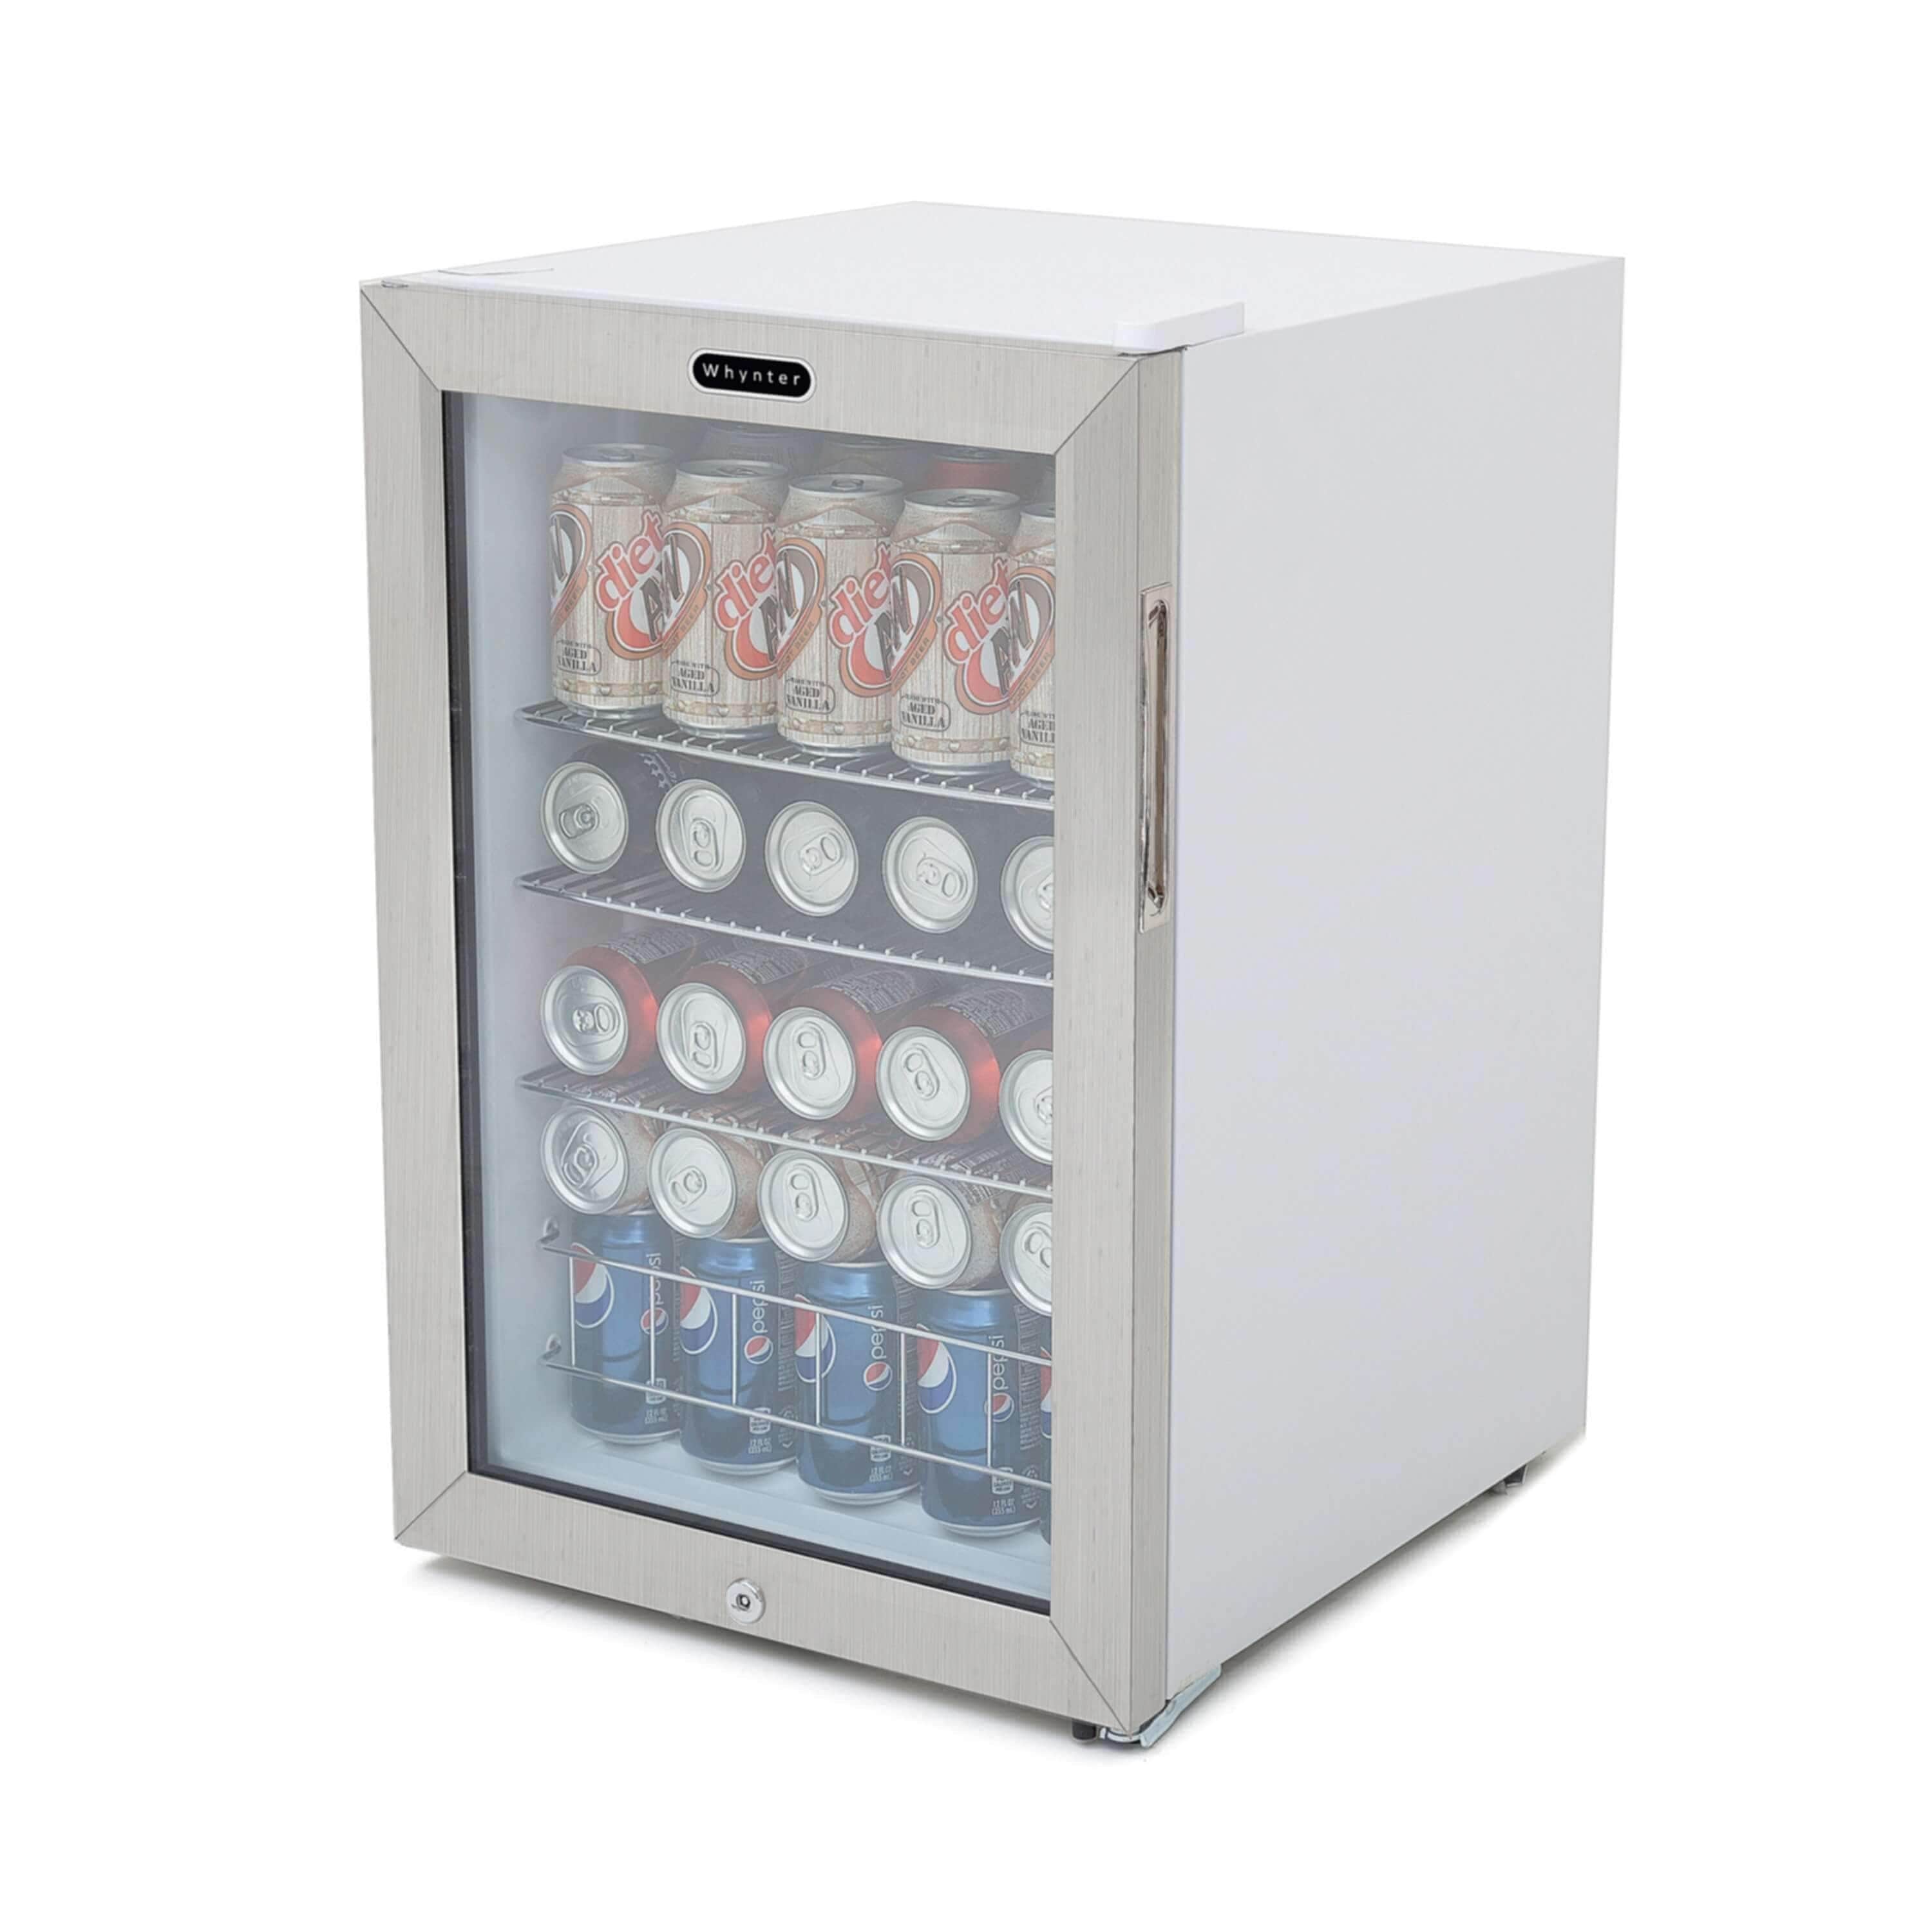 Whynter Beverage Refrigerator With Lock - Stainless Steel 90 Can Capacity BR-091WS Wine Coolers Empire